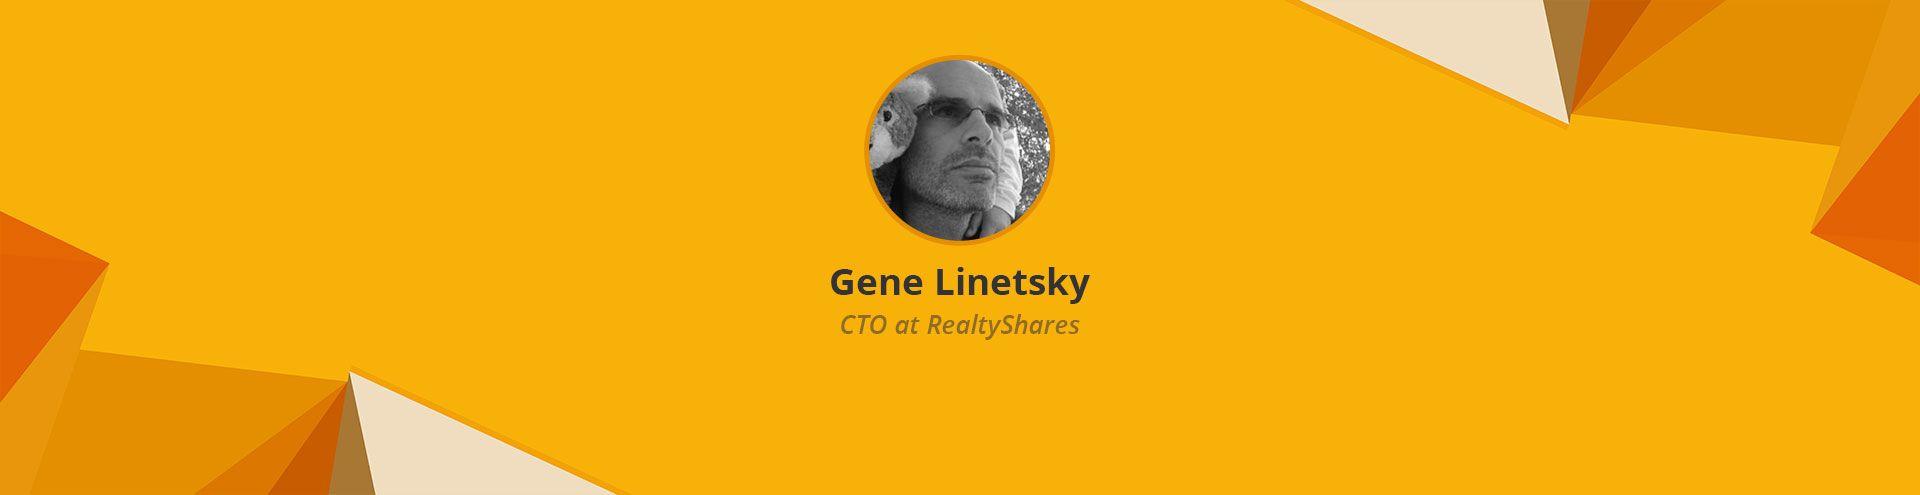 Investment App Inside: Expert Interview With Gene Linetsky, CTO at RealtyShares